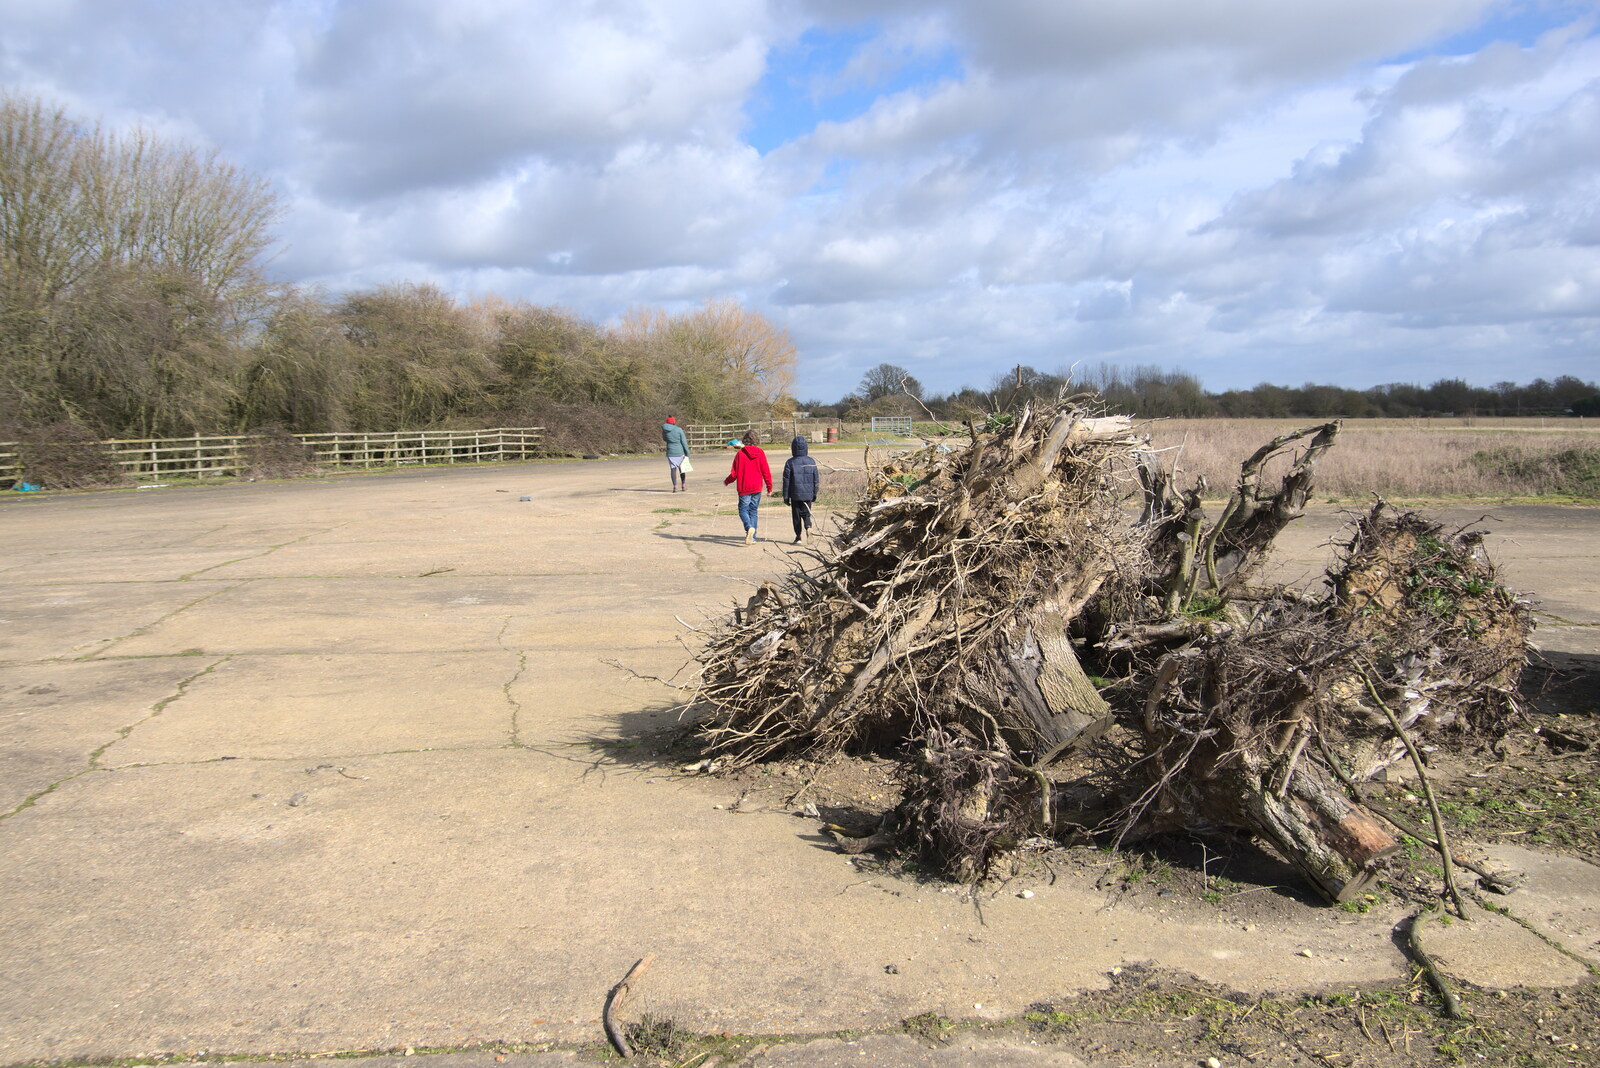 The gang wanders off past the tree stump pile from Another Walk on Eye Airfield, Eye, Suffolk - 14th March 2021